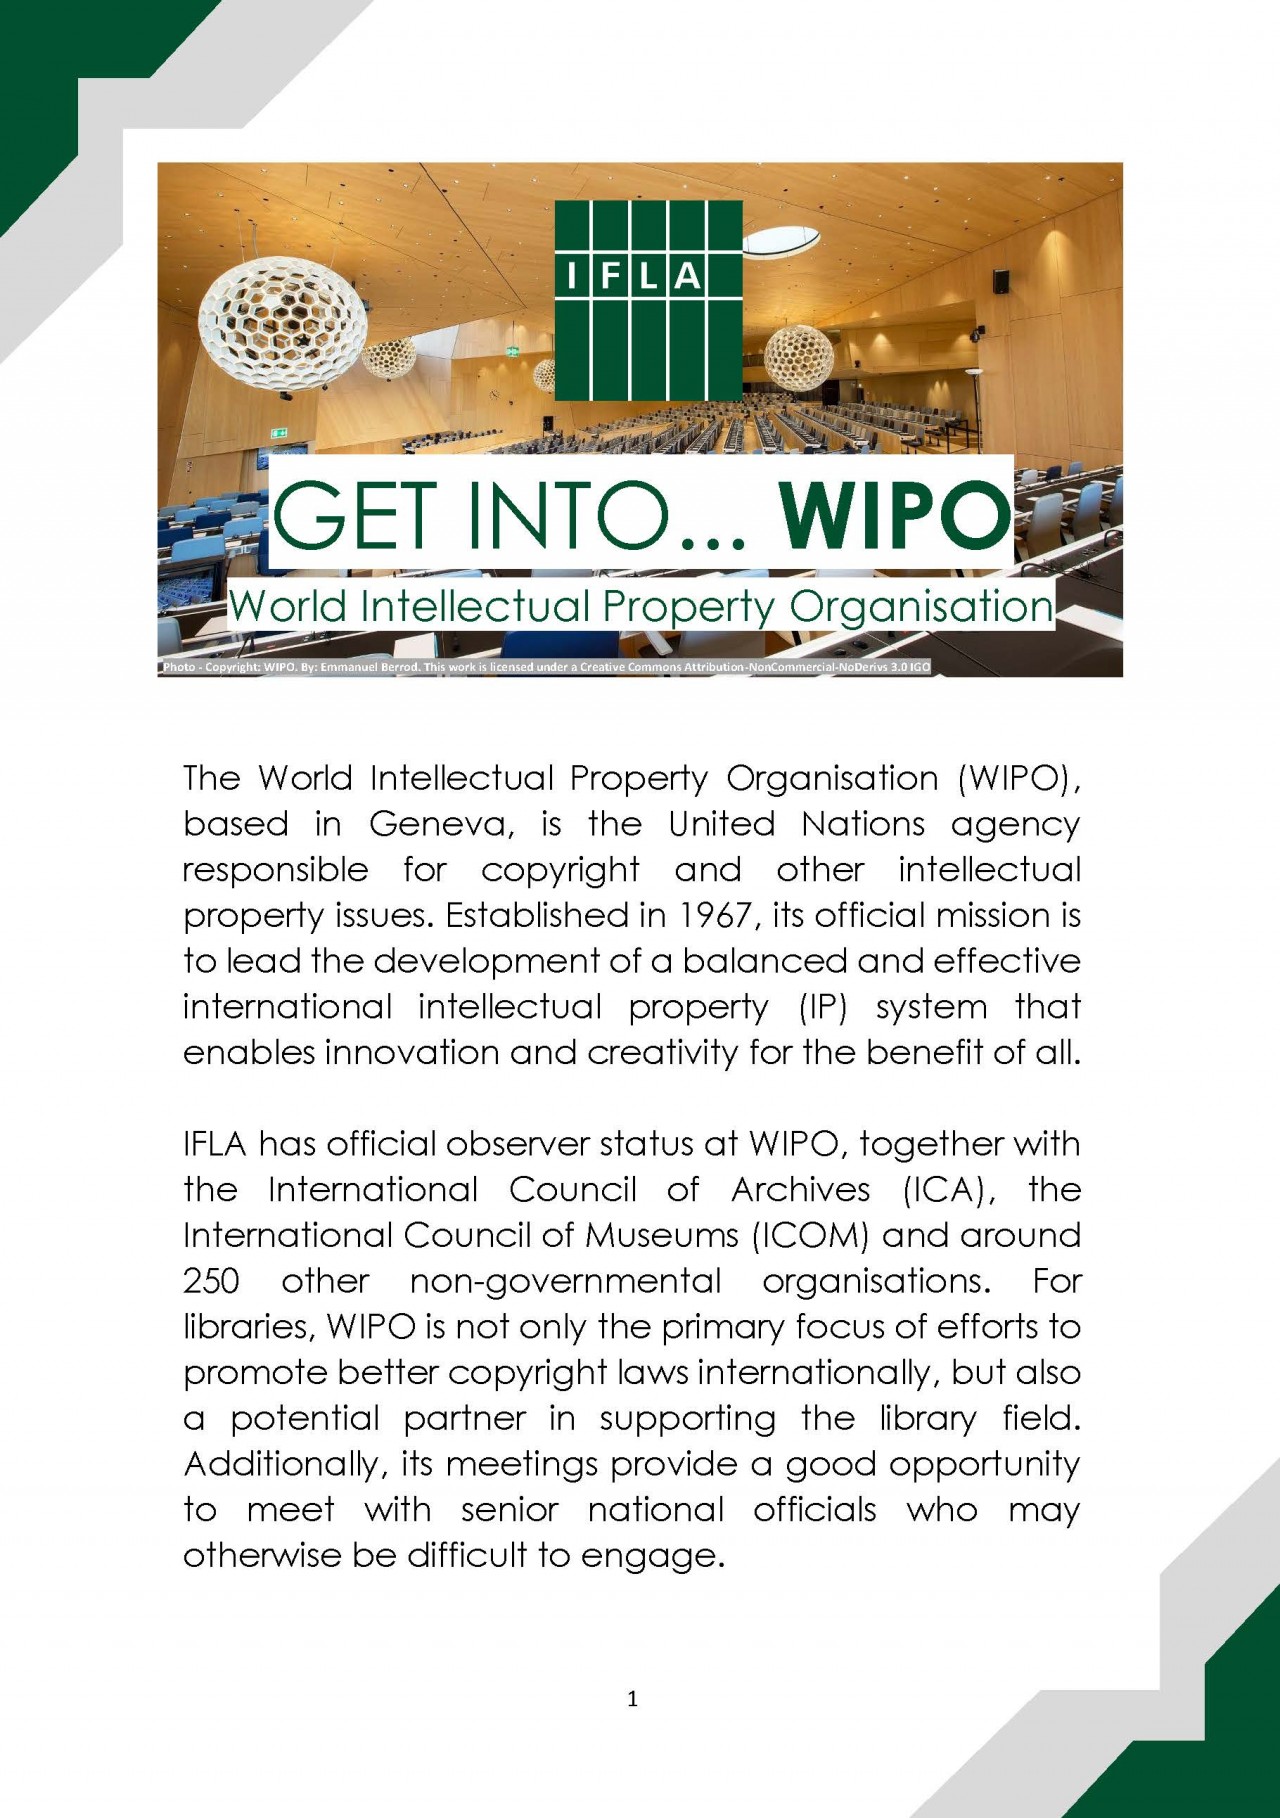 GET INTO WIPO Guide